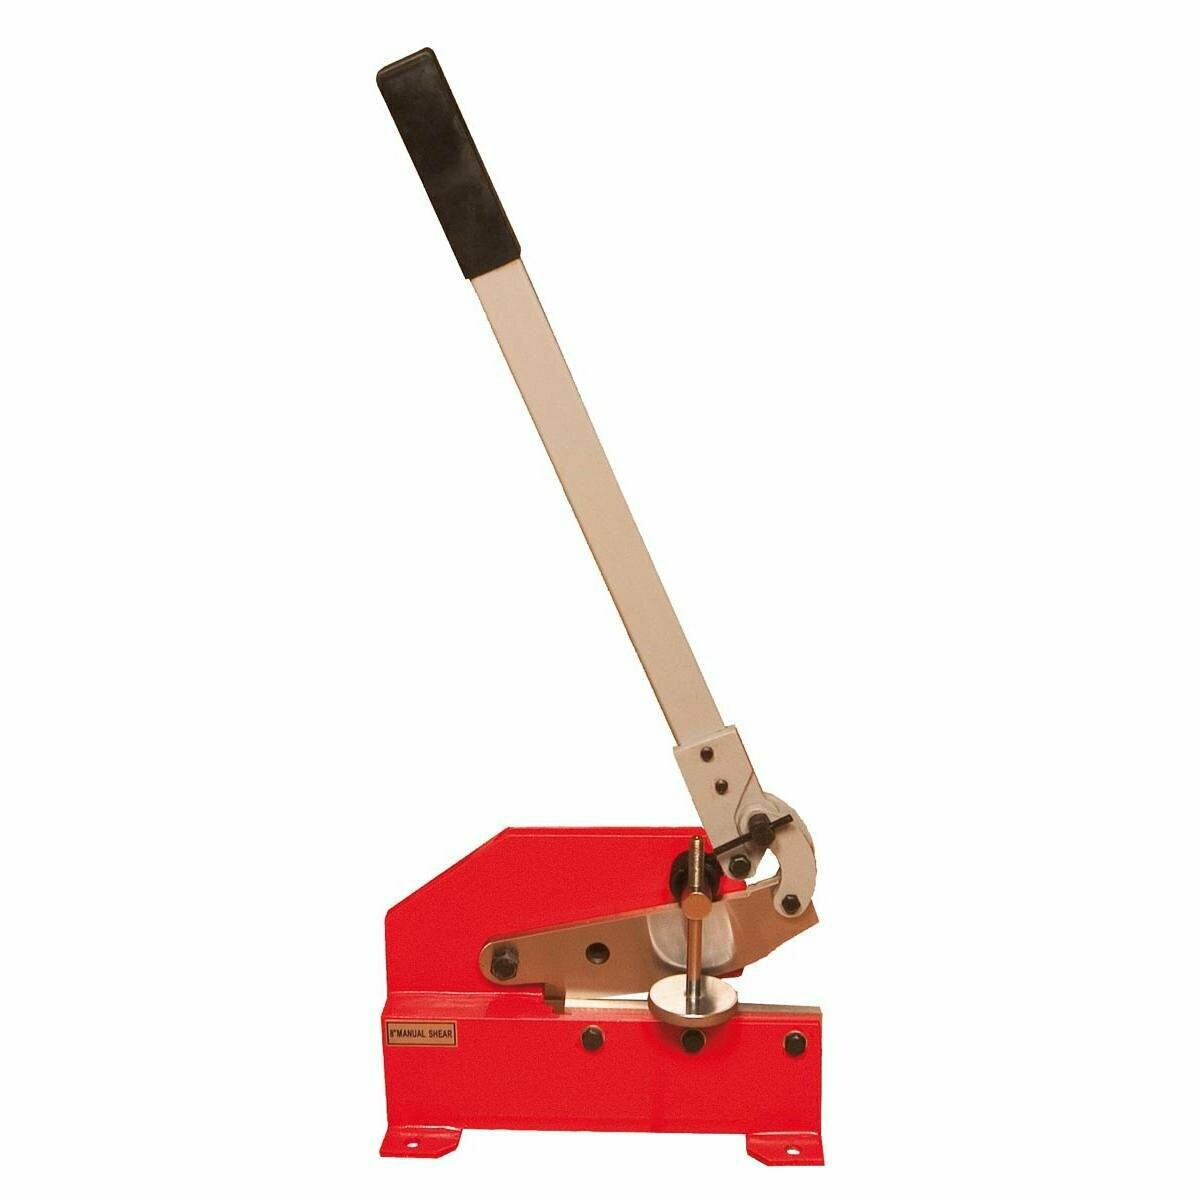 Holzmann HS200 Hand Shear
( Available with free of charge UK mainland delivery)